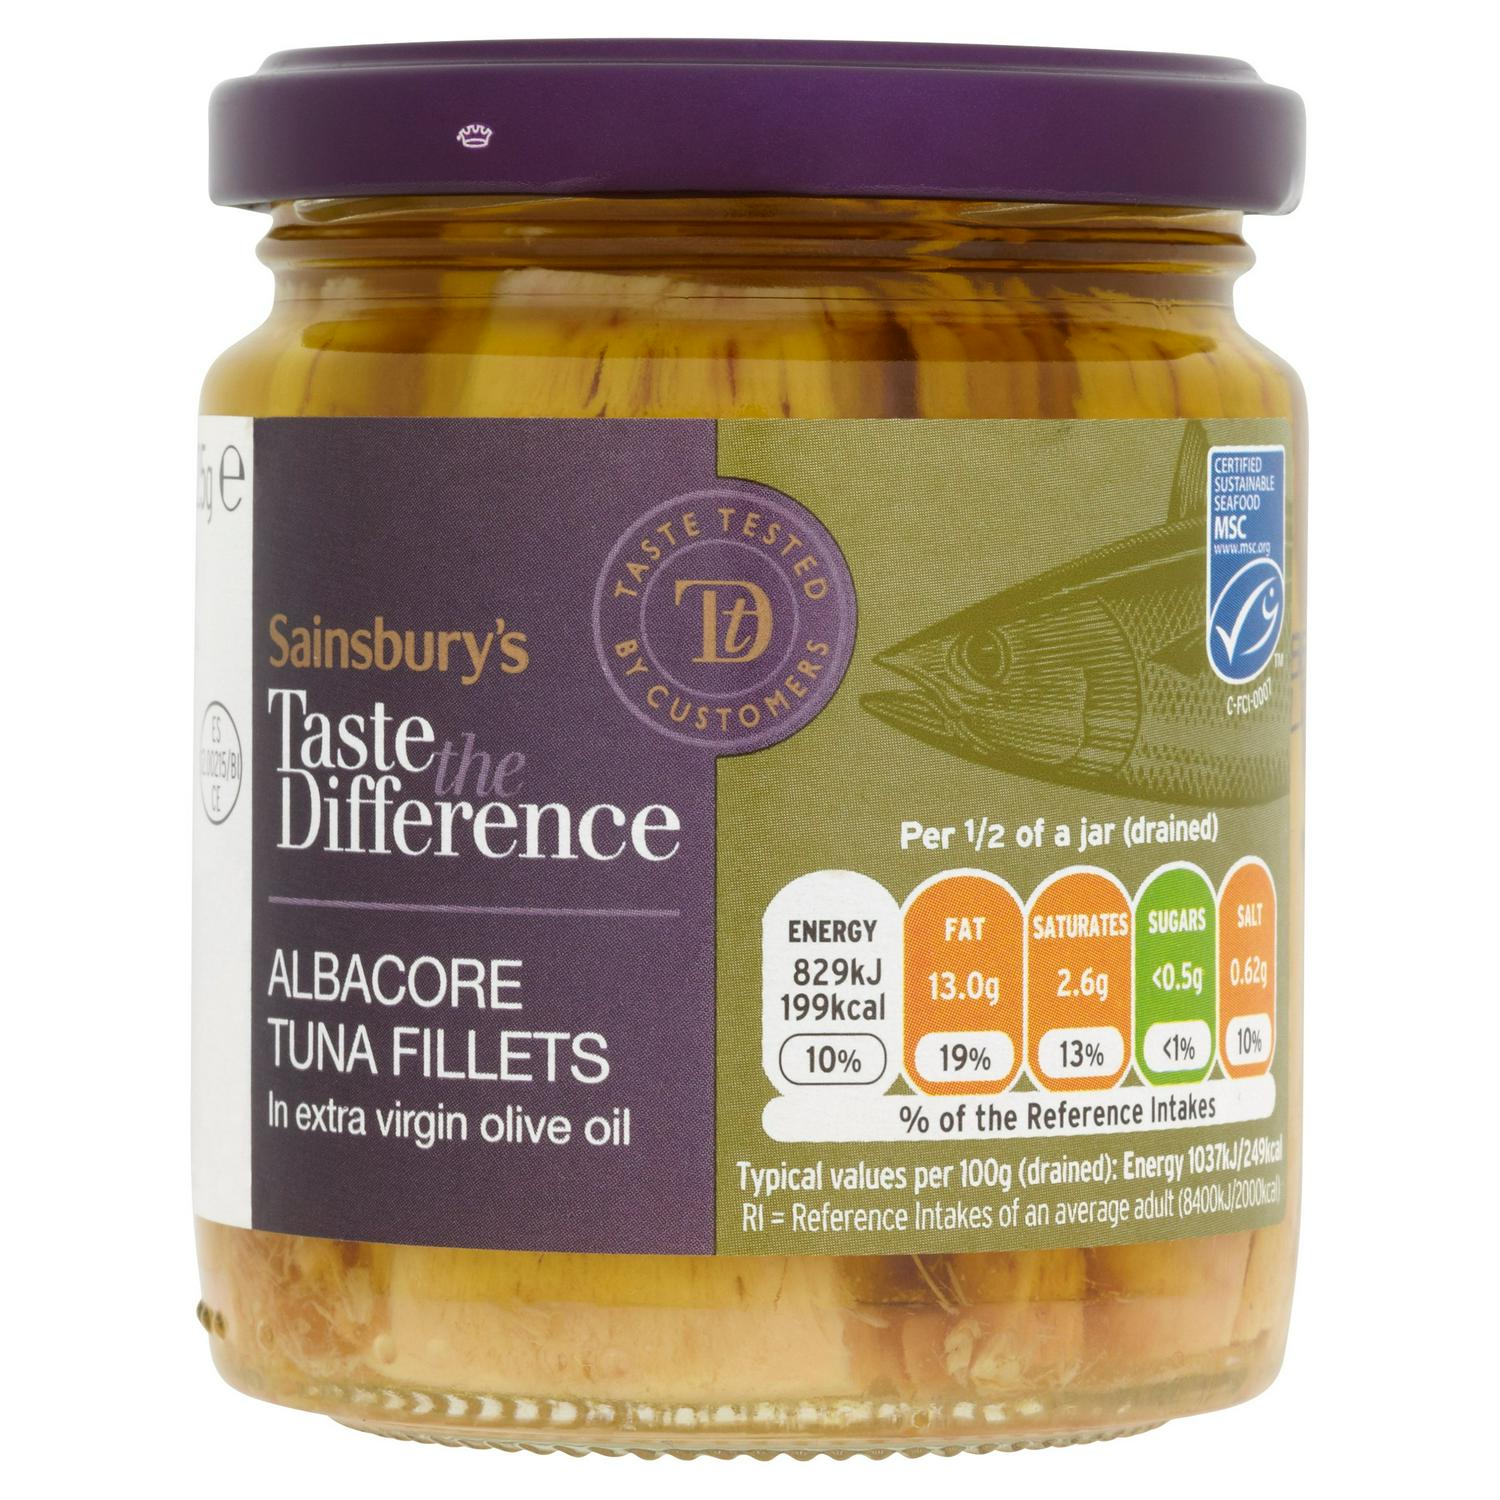 Sainsbury's Albacore Tuna in Extra Virgin Olive Oil, Taste the Difference 225g